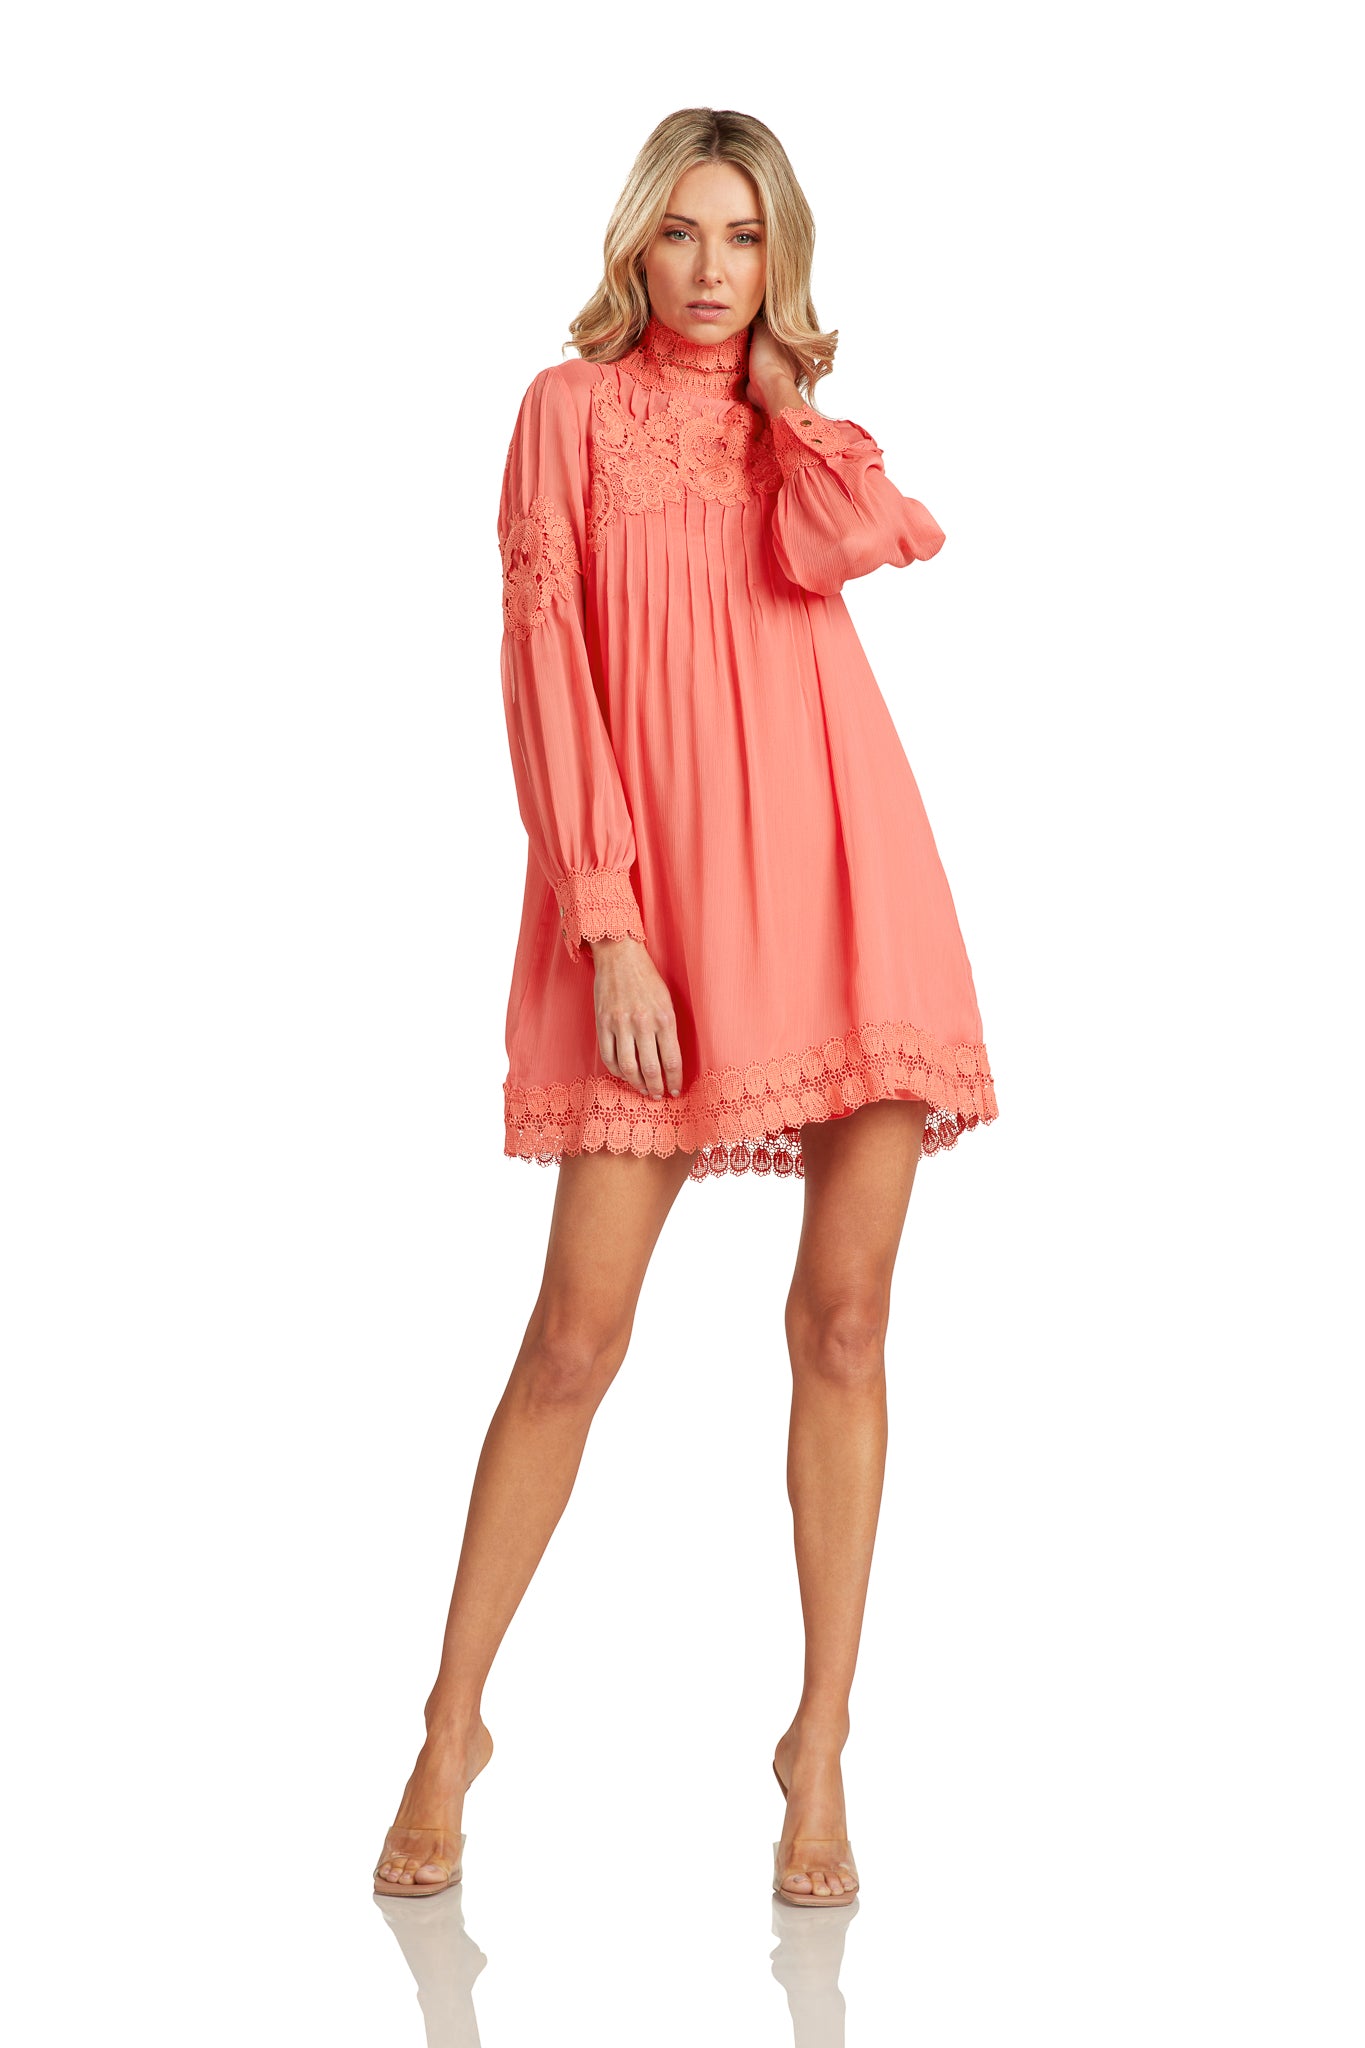 SPRING DRESS EVENT NATALIE TUNIC DRESS CORAL